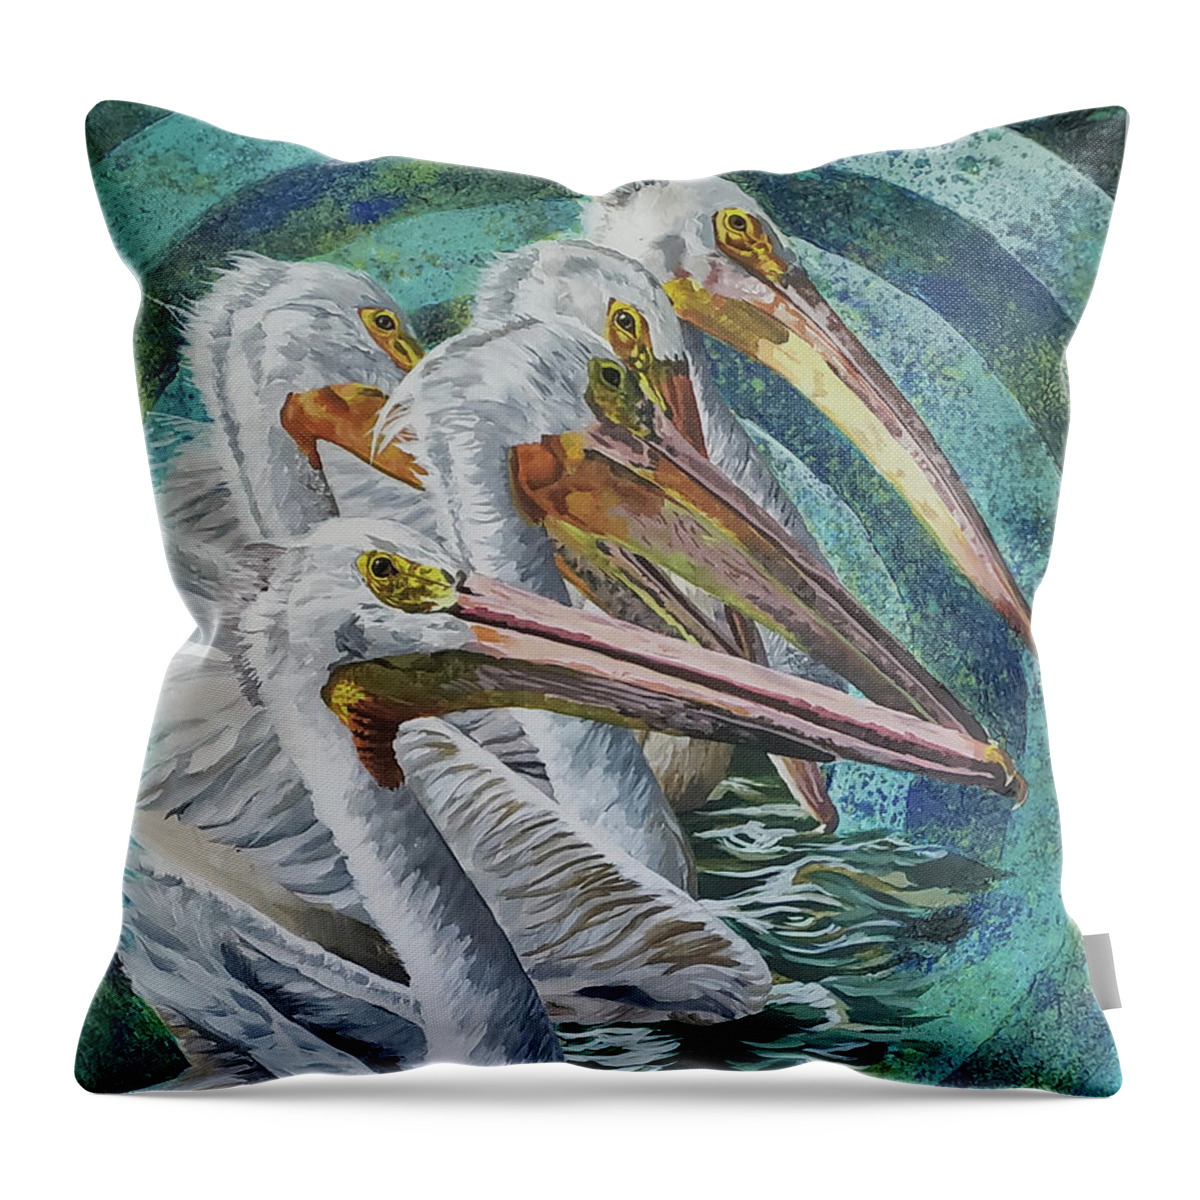 Pelicans Throw Pillow featuring the mixed media The Morning Commute by Shawn Conn